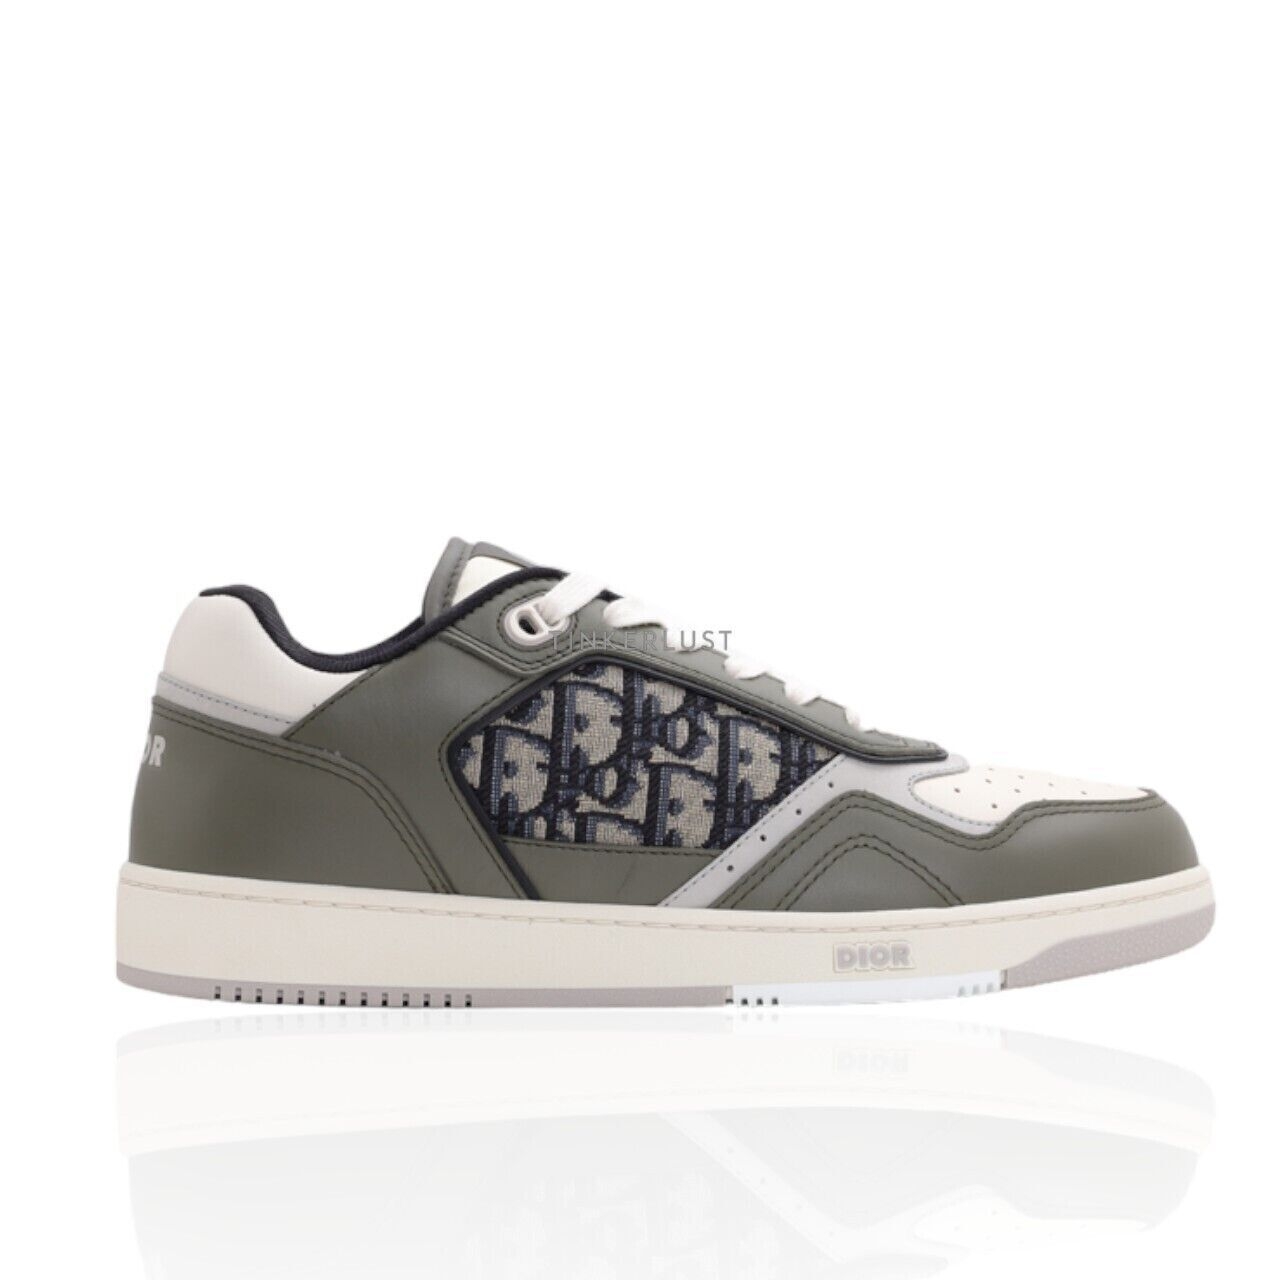 Christian Dior Oblique in Green/Beige Multicolors Low Top Sneakers